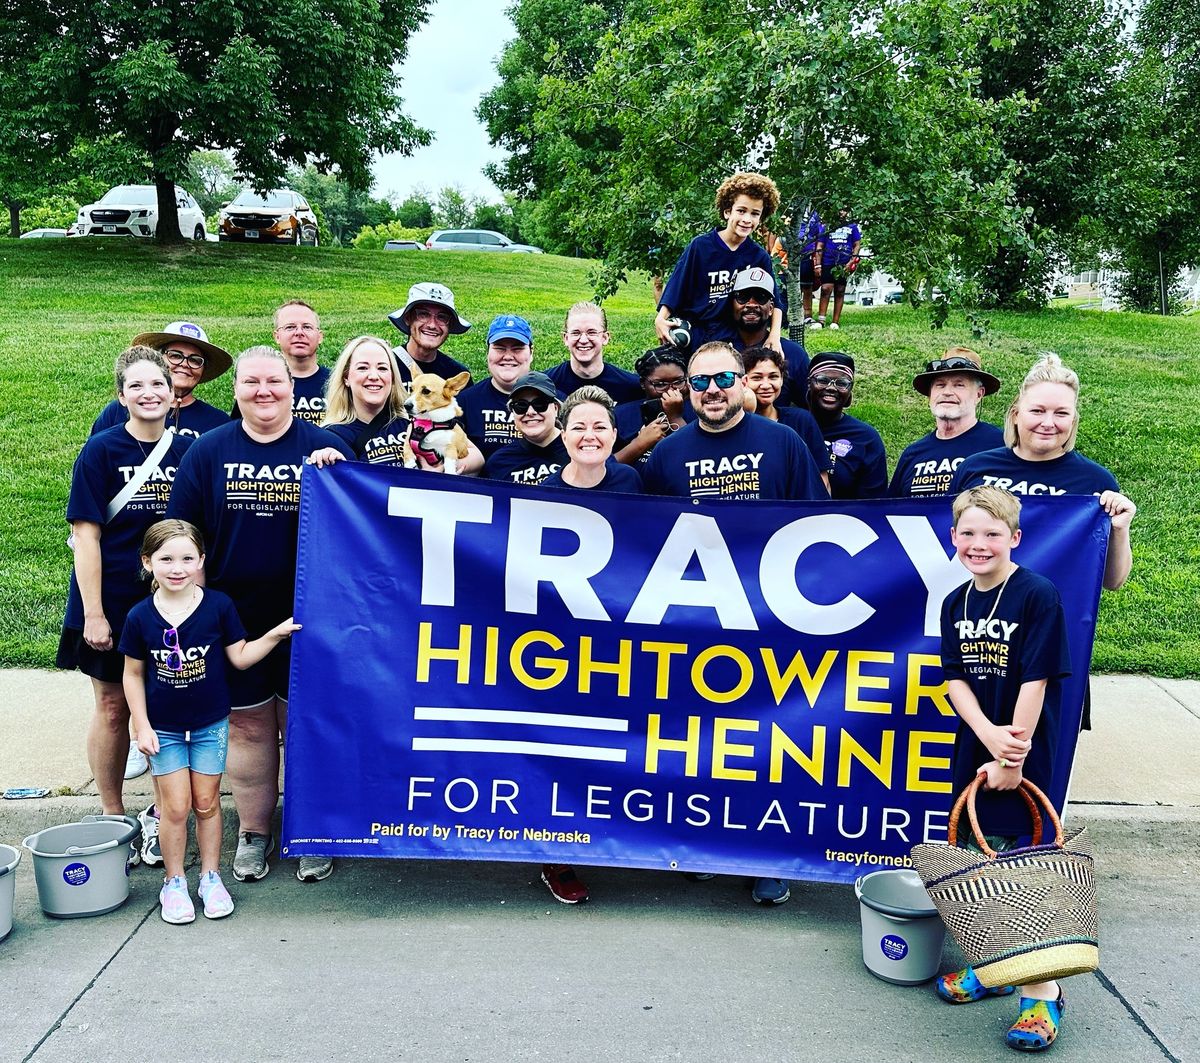 Walk with Tracy Hightower-Henne at the Florence Days Parade!